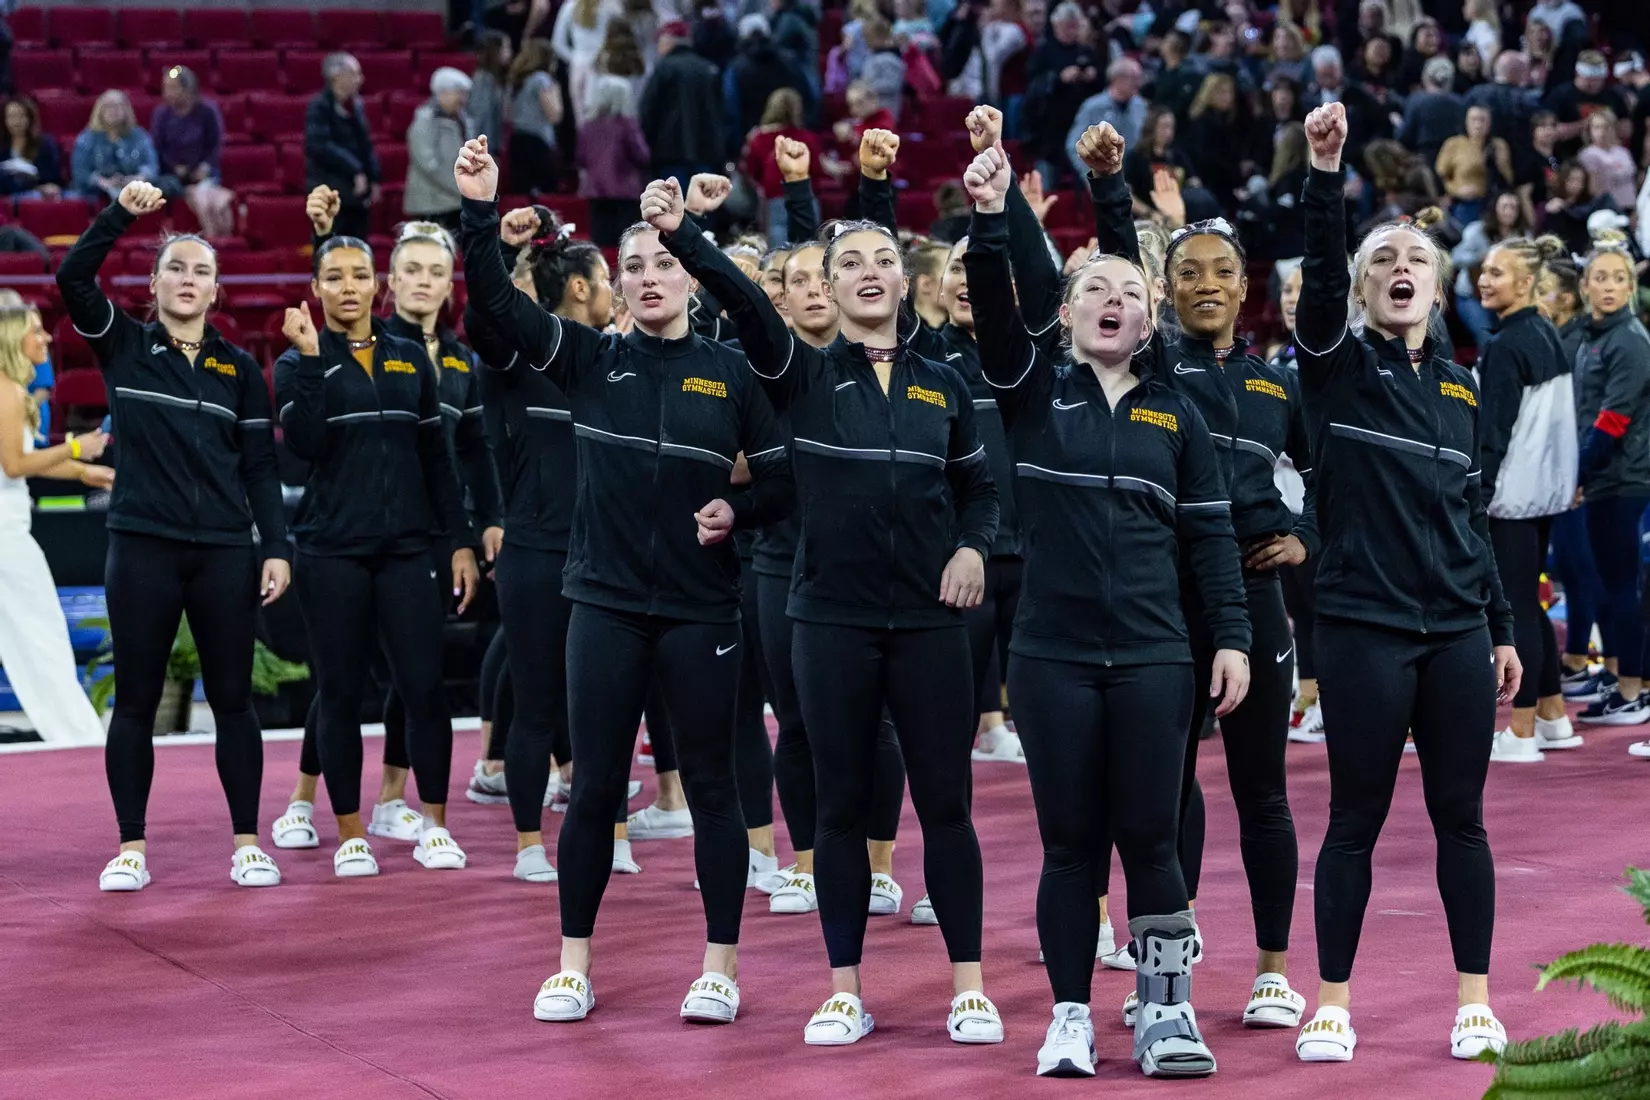 Golden Gophers Fall Short of Advancing to Regional Final, Finish Third Behind Michigan and Denver